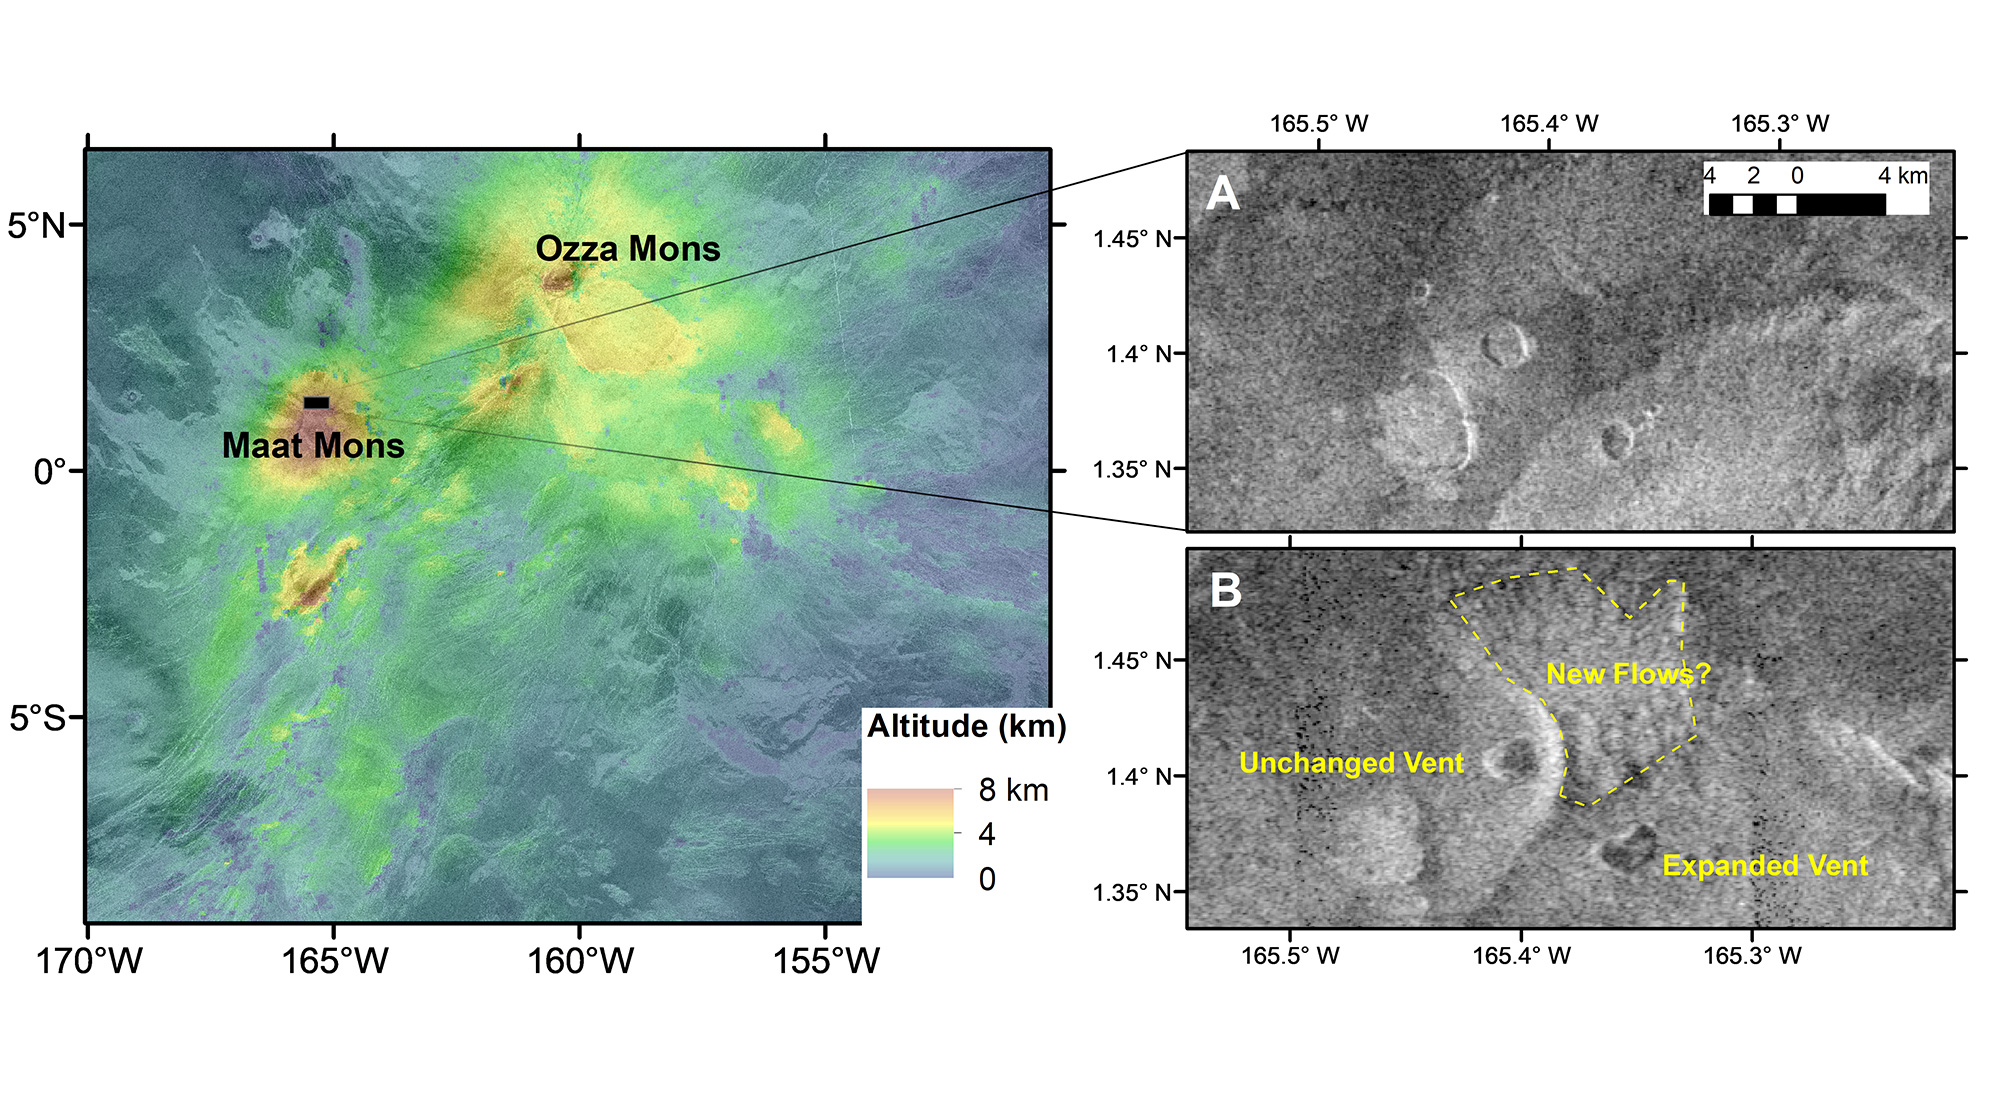 Altitude data for the Maat and Ozza Mons region on the Venus surface is shown at left, with the area of study indicated by the black box. At right are the before (A) and after (B) Magellan observations of the expanded vent on Maat Mons, with possible new lava flows after an eruptive event.